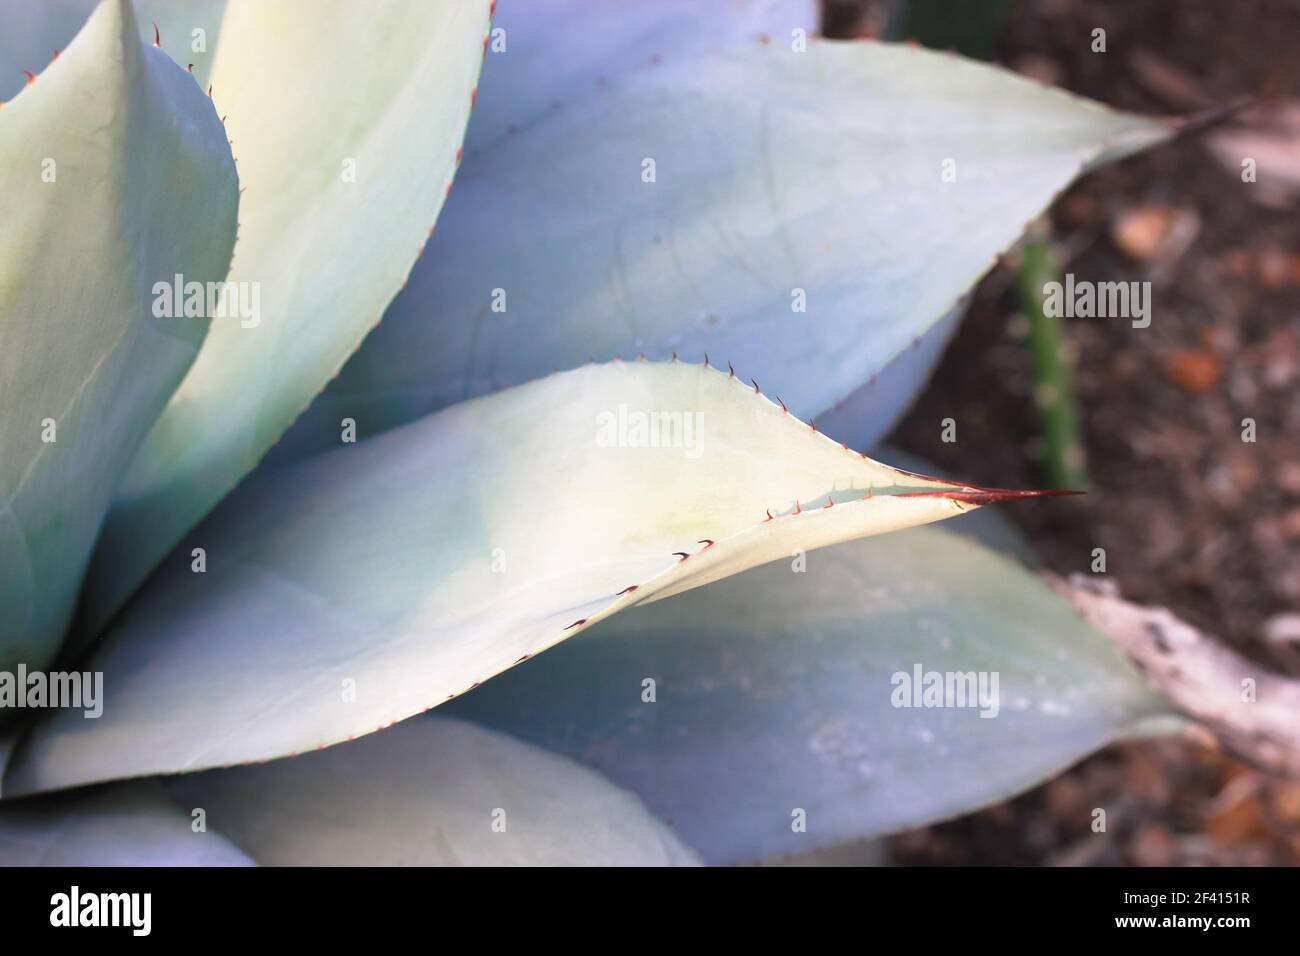 Blue-green agave leaves with thorns, Asparagaceae plant backgrounds, textures. Stock Photo